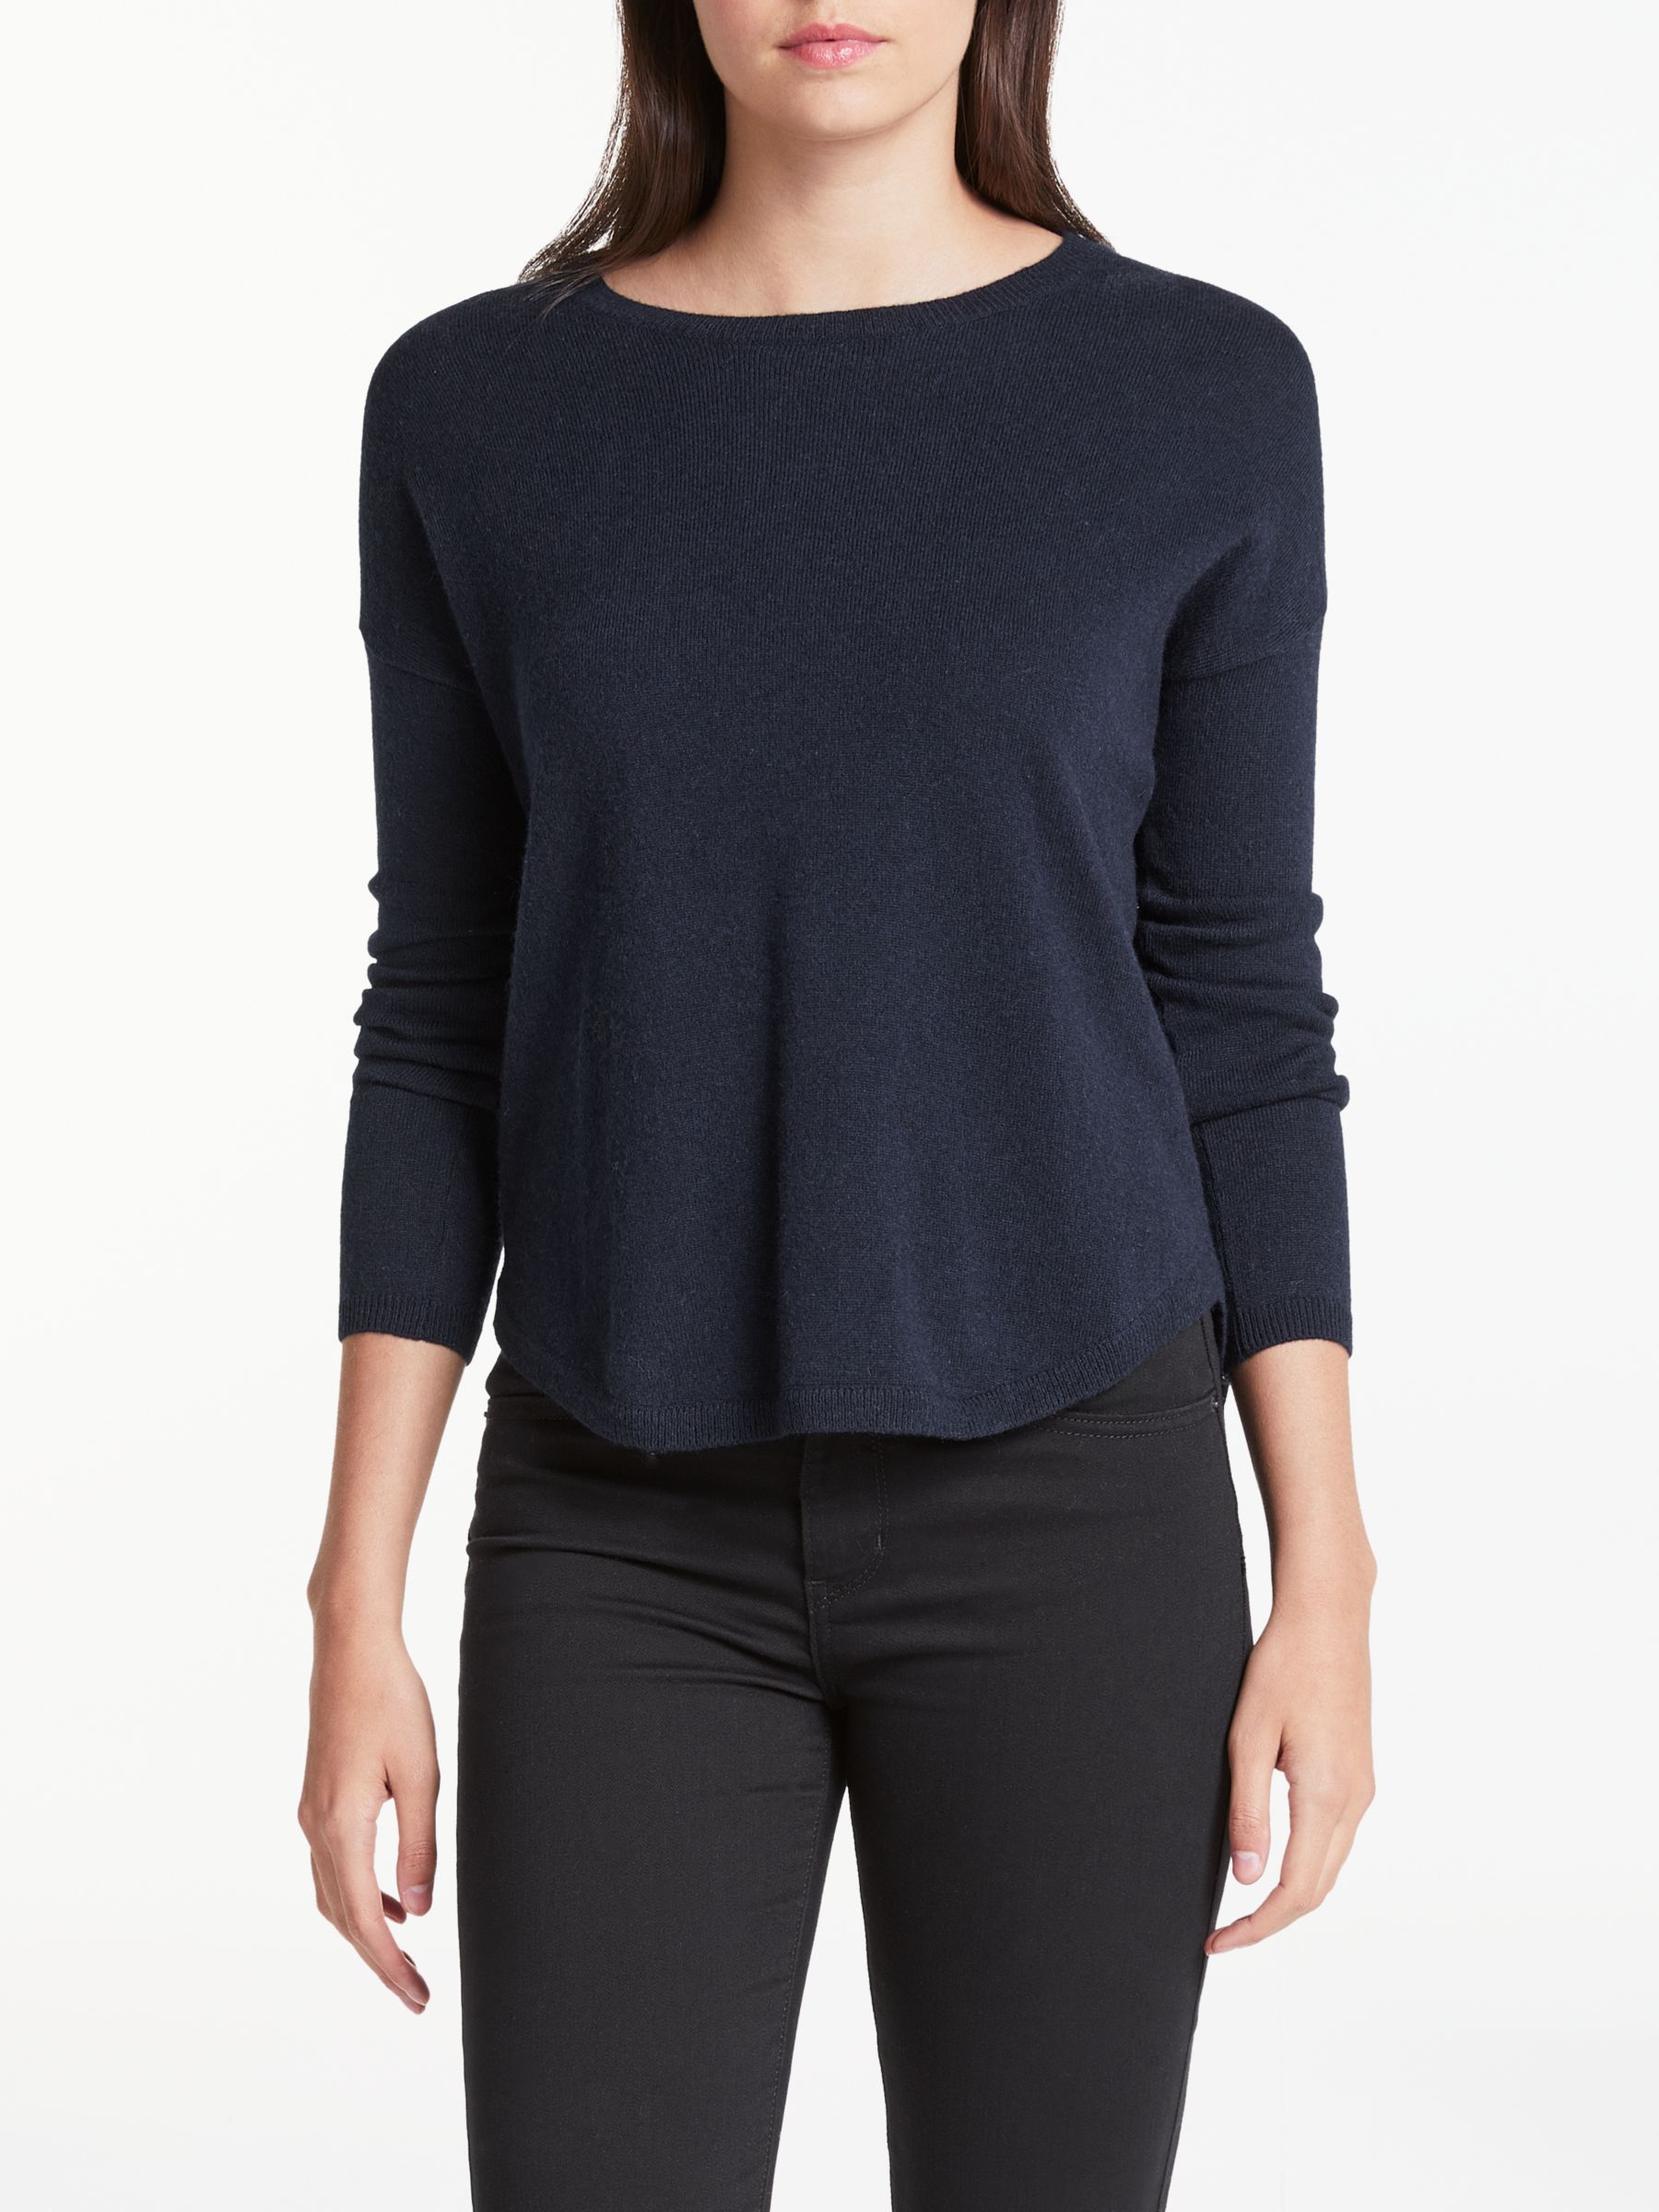 Wyse London Flo Sequin Slouchy Cashmere Jumper at John Lewis & Partners